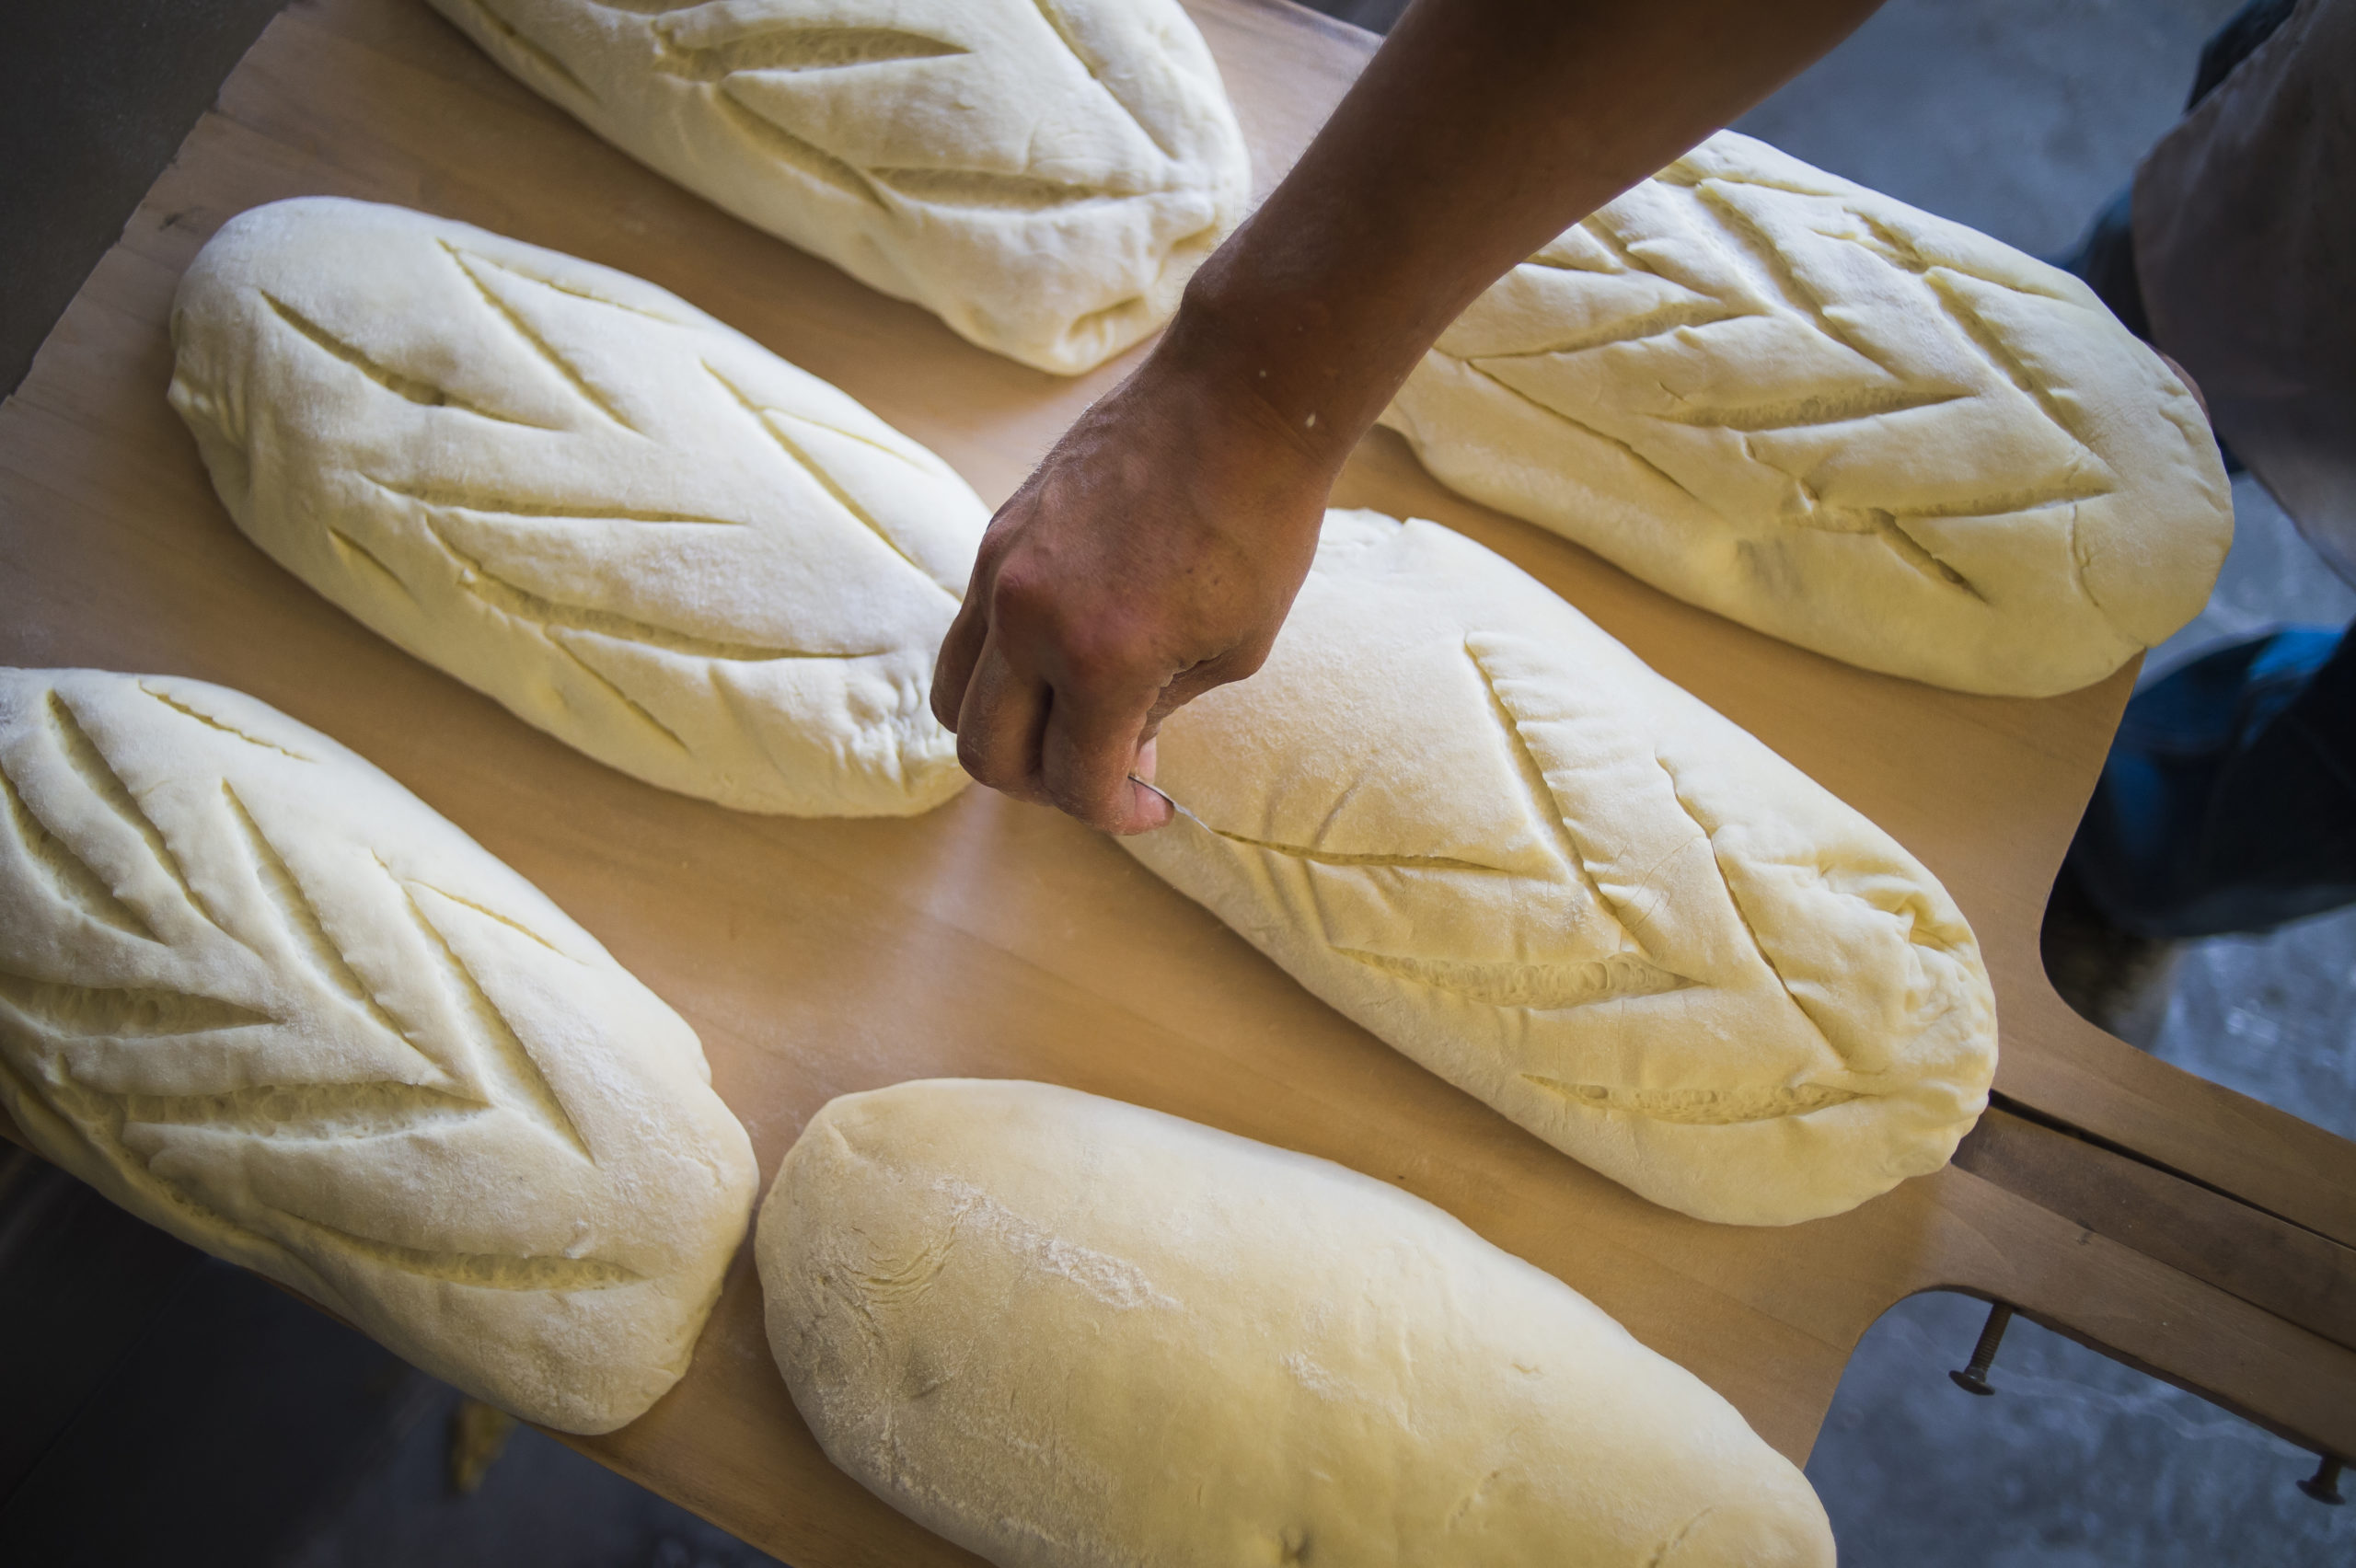 Photo of baker scoring bread before putting it in the oven. Photo taken at Wild Wheat Bakery in Kent, Washington.